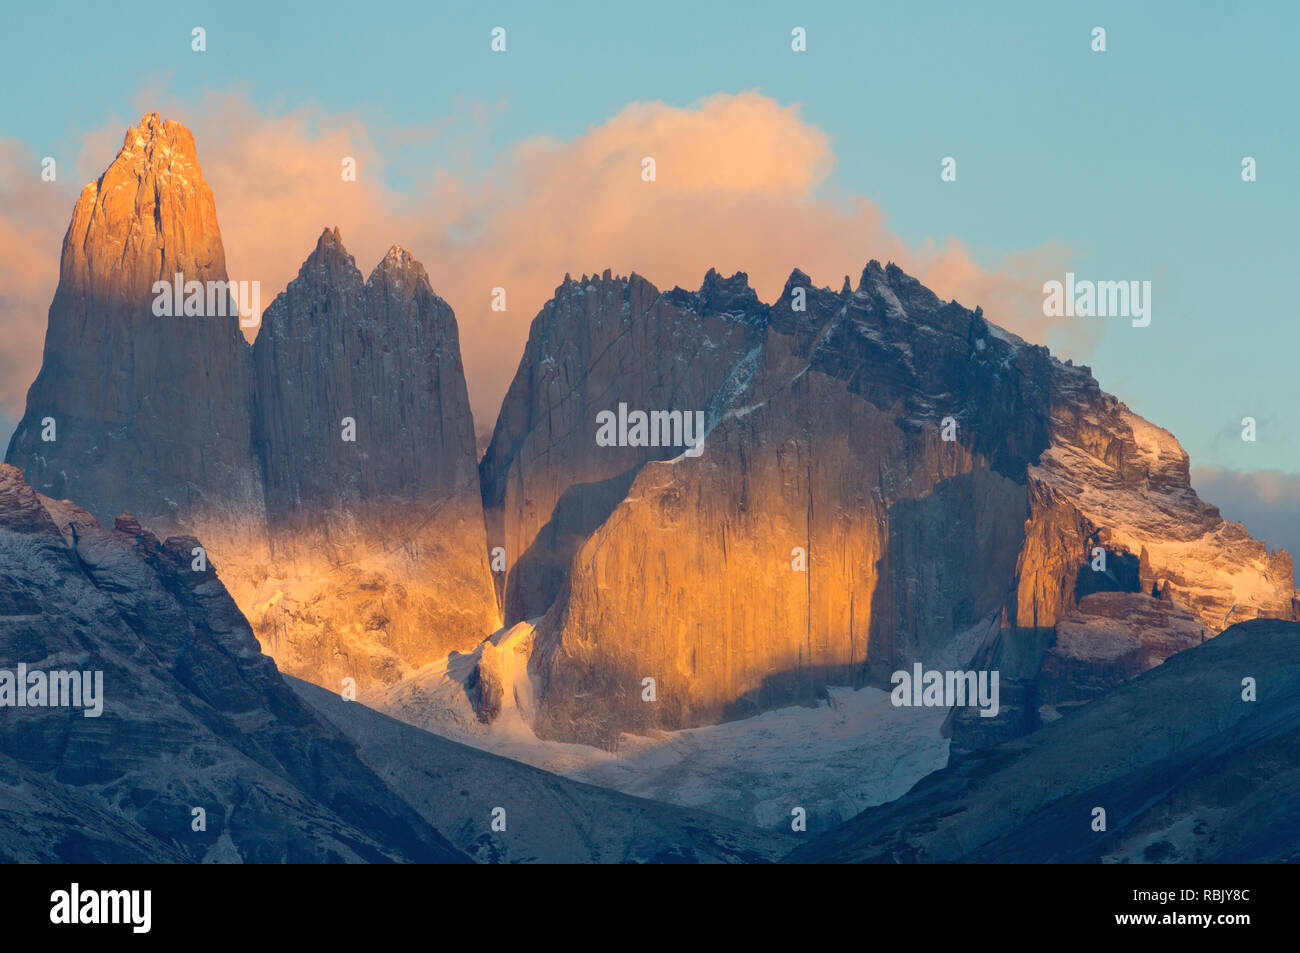 Monoliths in the Andes Mountains of Patagonia in Chile. Torres Del Paine National Park. Stock Photo